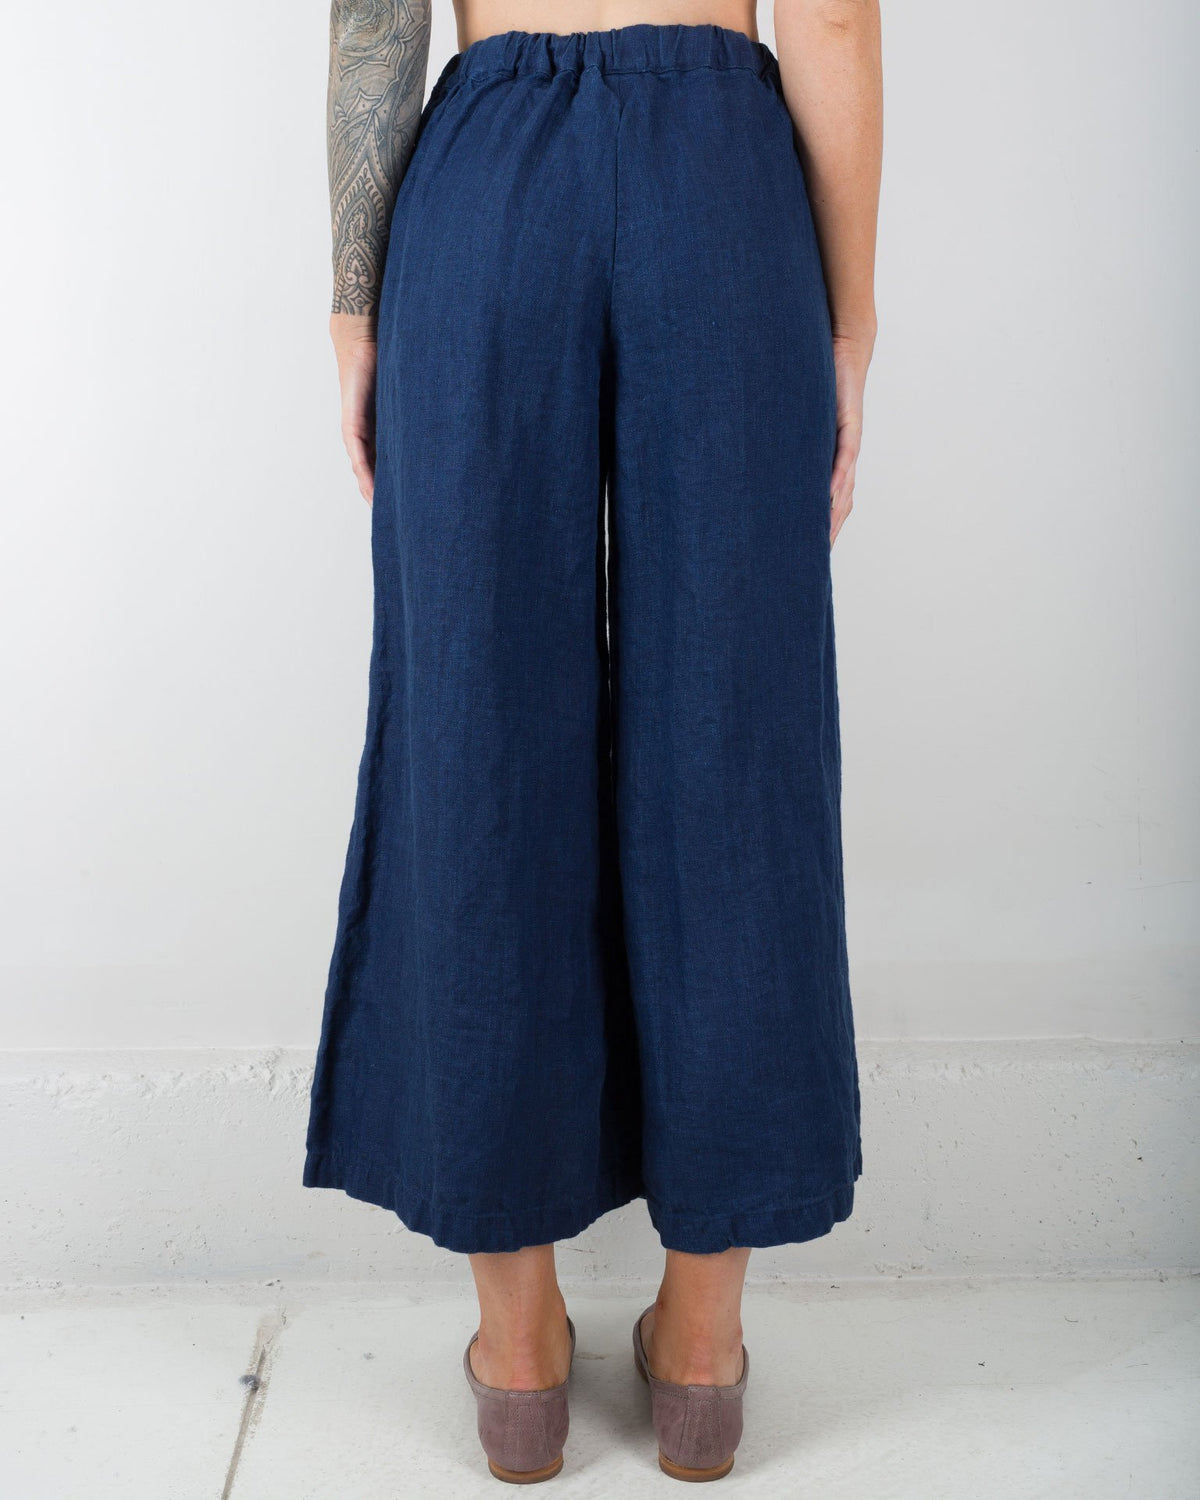 CP Shades Clothing Cropped Wendy Pant in Indigo